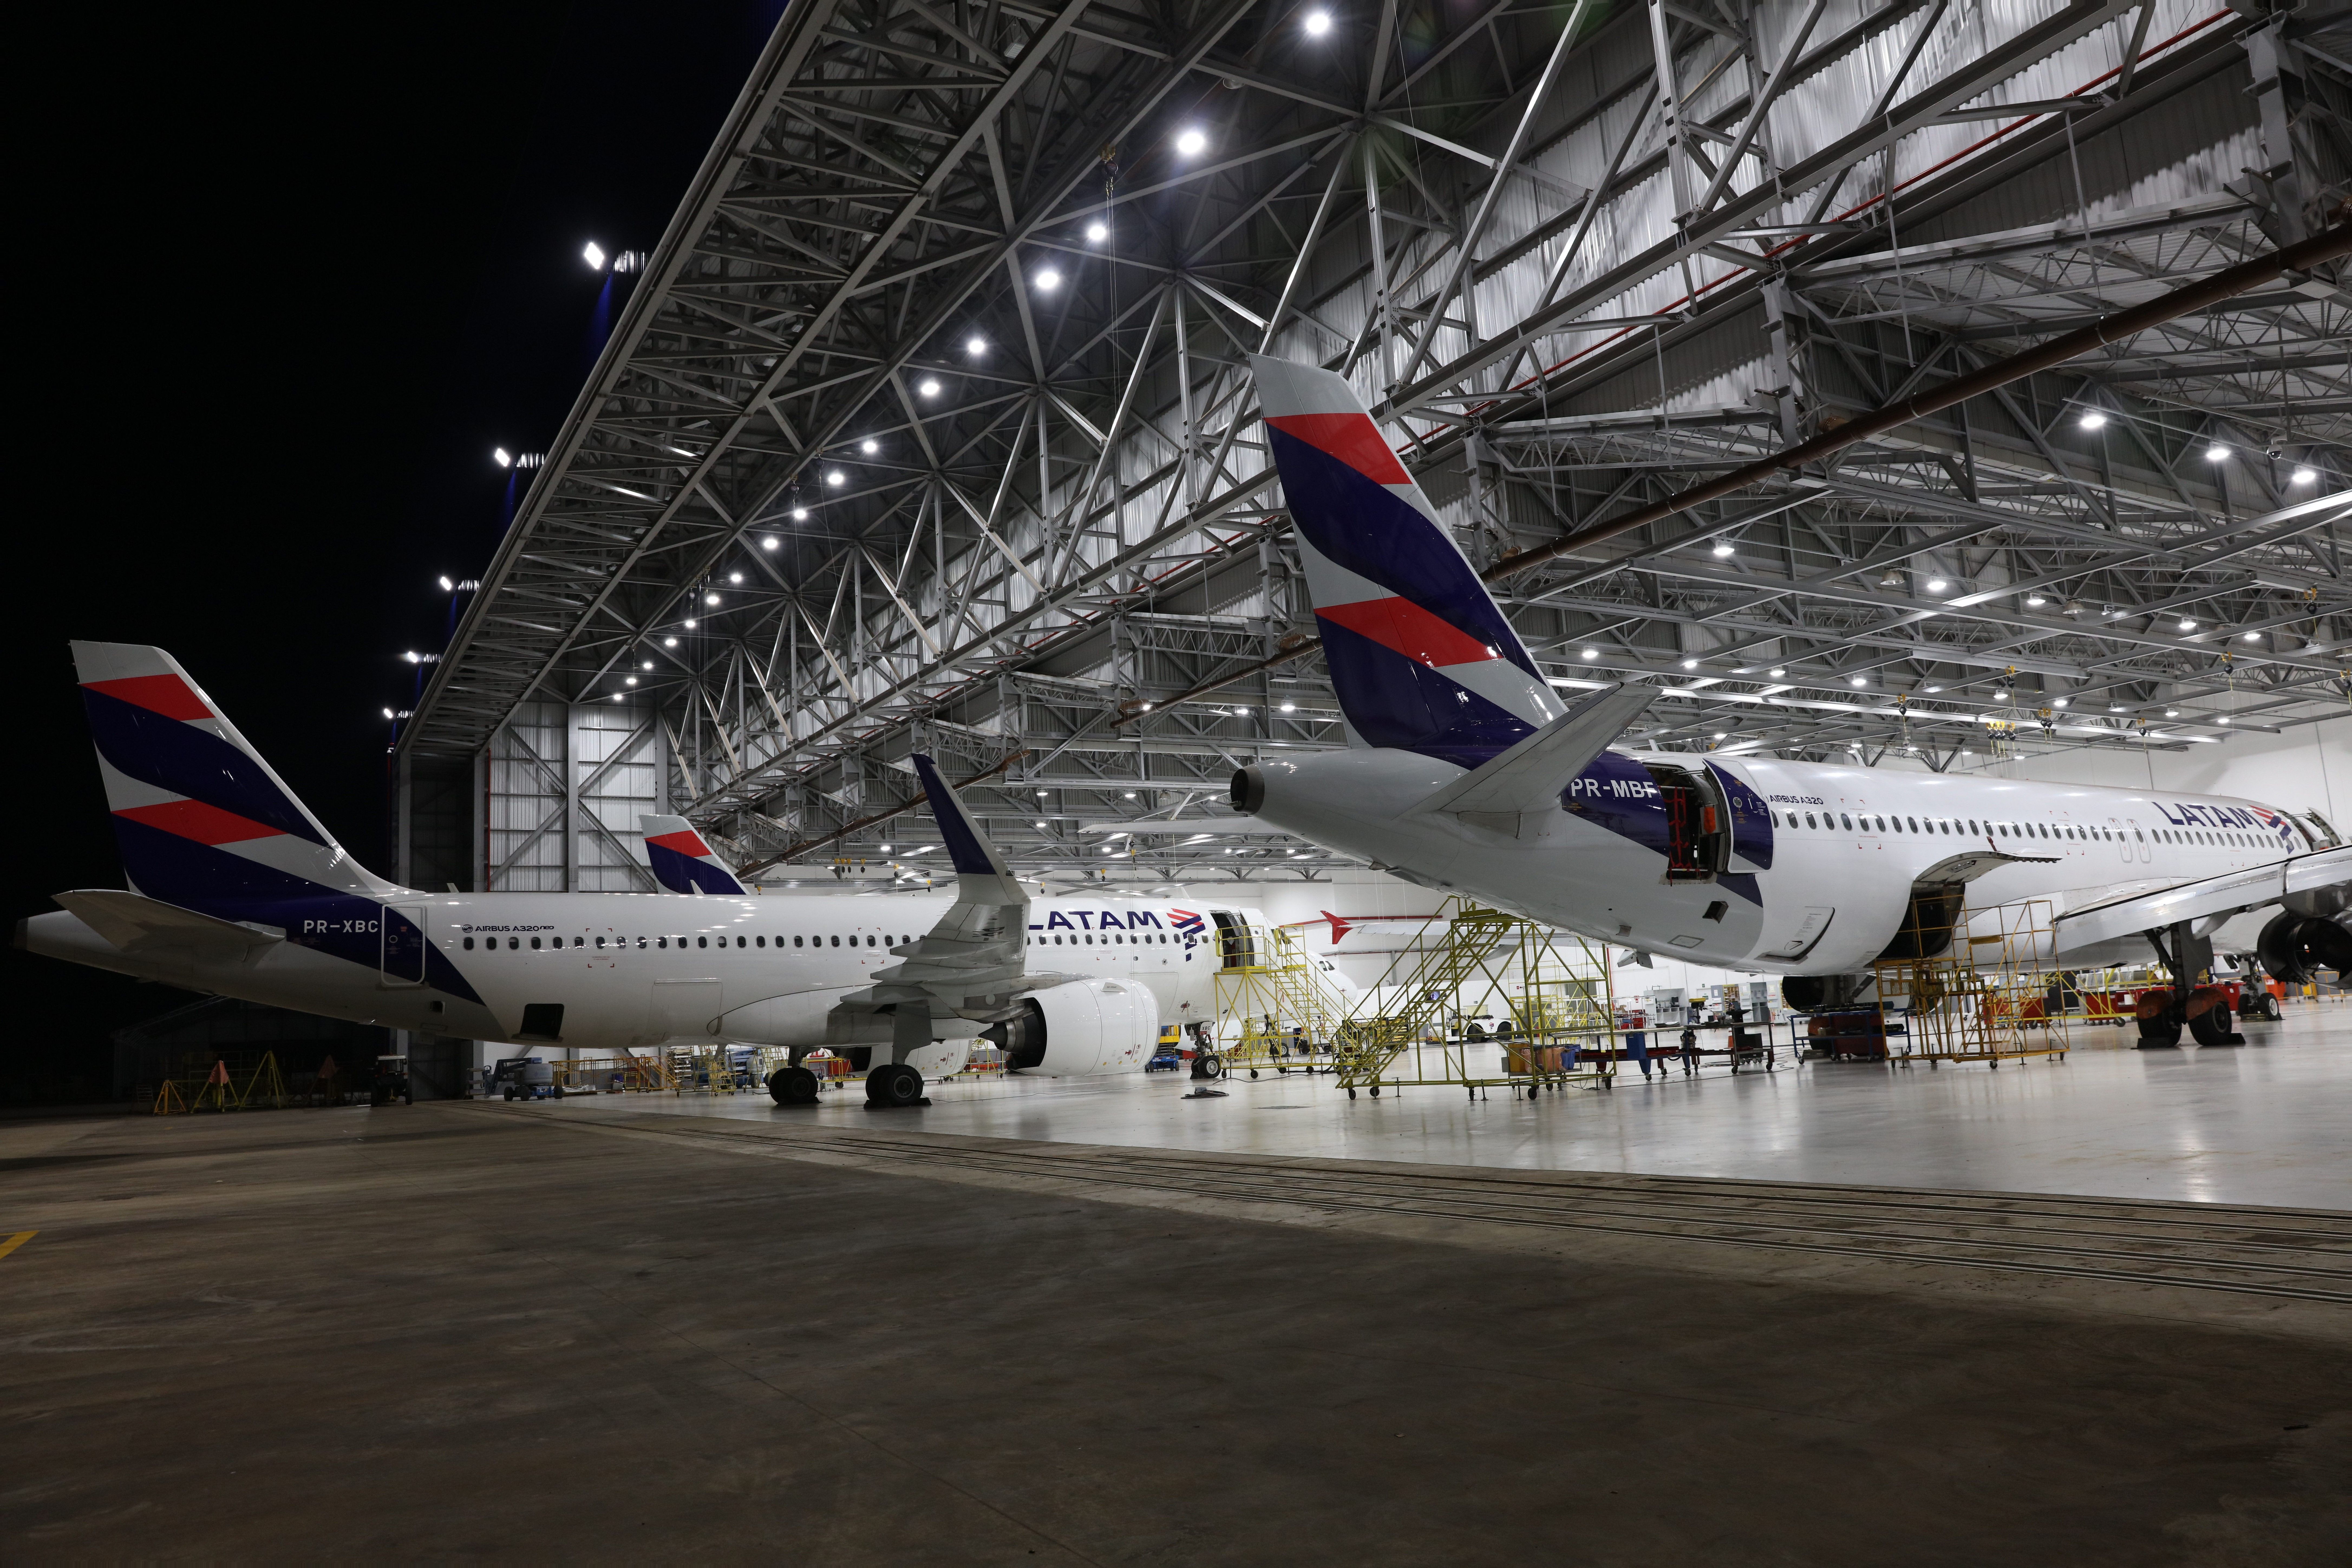 Two LATAM aircraft inside an MRO facility being maintained.